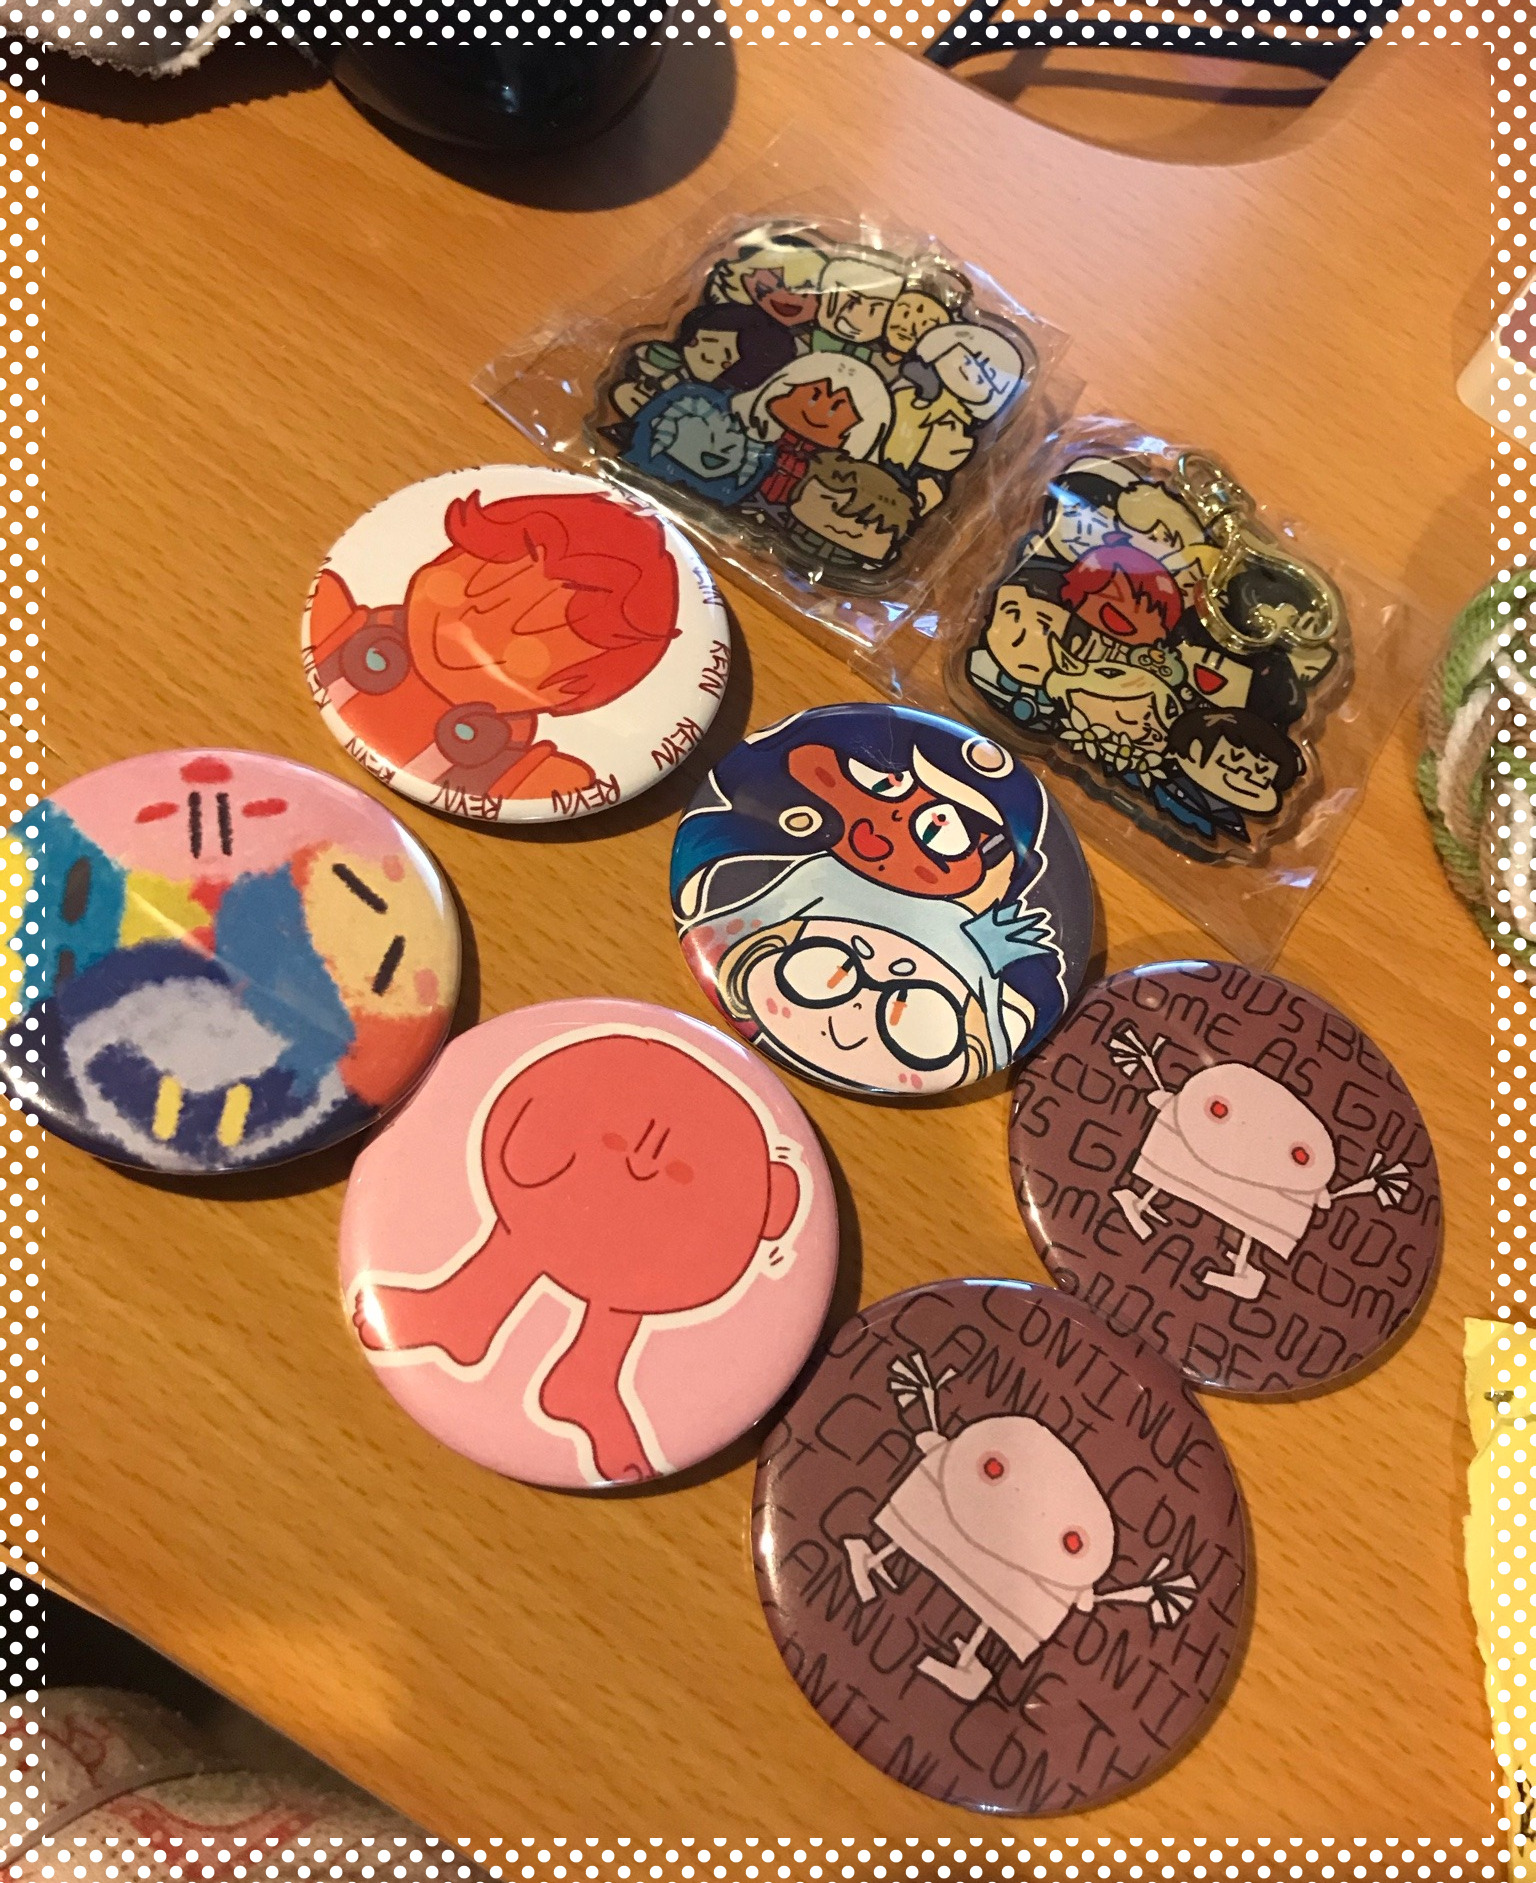 photo of assorted buttons and acrylic charms. from top to bottom left to right, is a xenoblade x group charm front and back, then a reyn xenoblade pin, off the hook splatoon pin, nier automata robot become as gods pin, kirby's return to dreamland pin, kirby with feet pin, and nier automata robot this cannot continue pin. they are displayed on a wooden desk with a polka dot frame around the pic.